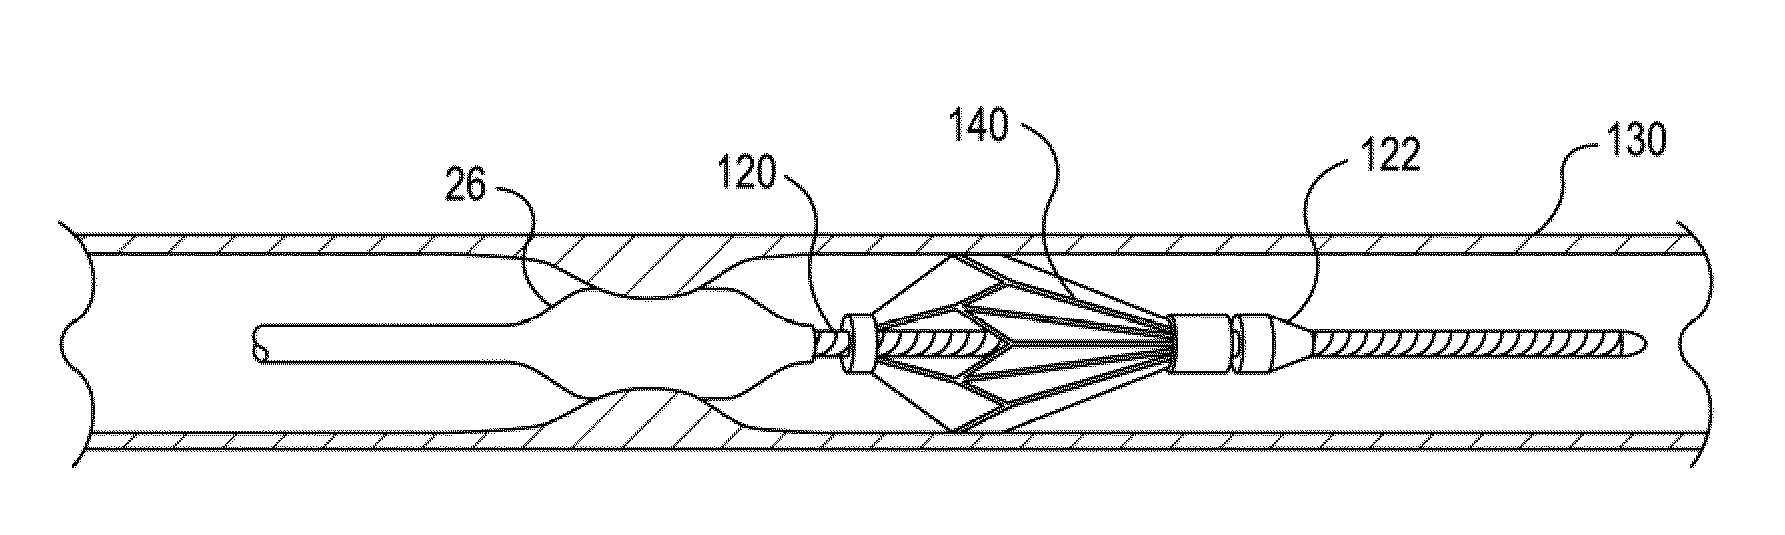 Method of providing embolic protection and shockwave angioplasty therapy to a vessel